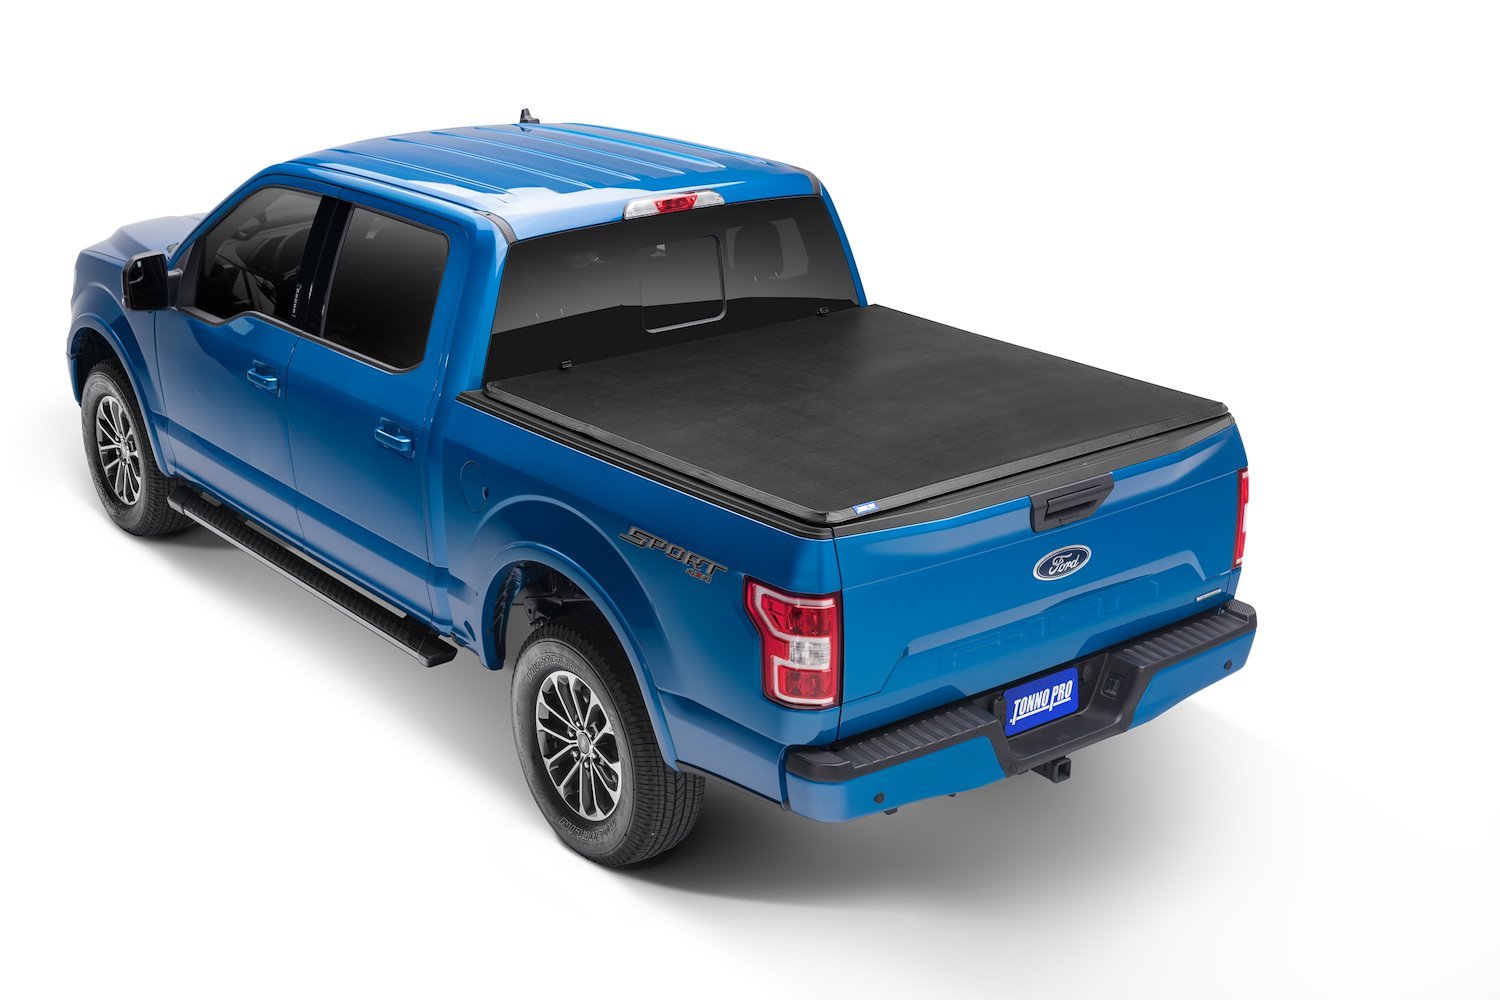 Soft Vinyl Tri-Fold Tonneau Cover Fits Select Ford F-150 Trucks [6 ft. 7 in. Bed]